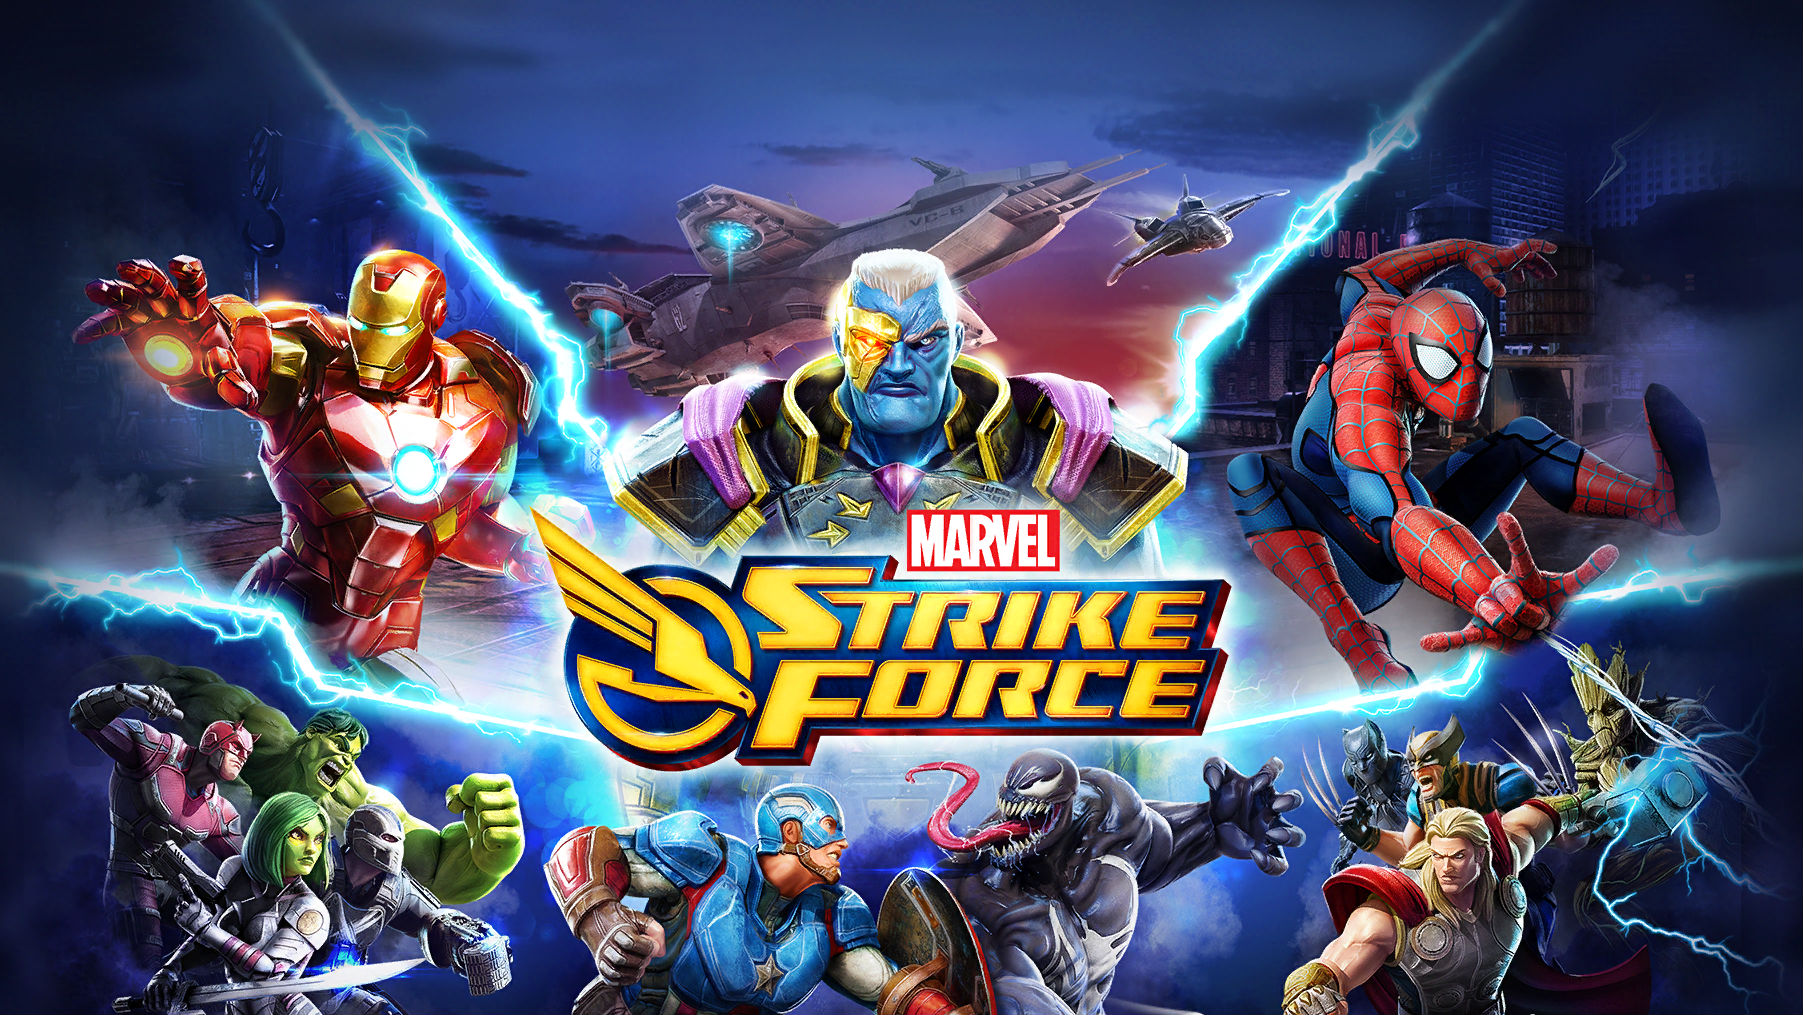 Marvel Strike Force tips and hints for beginners